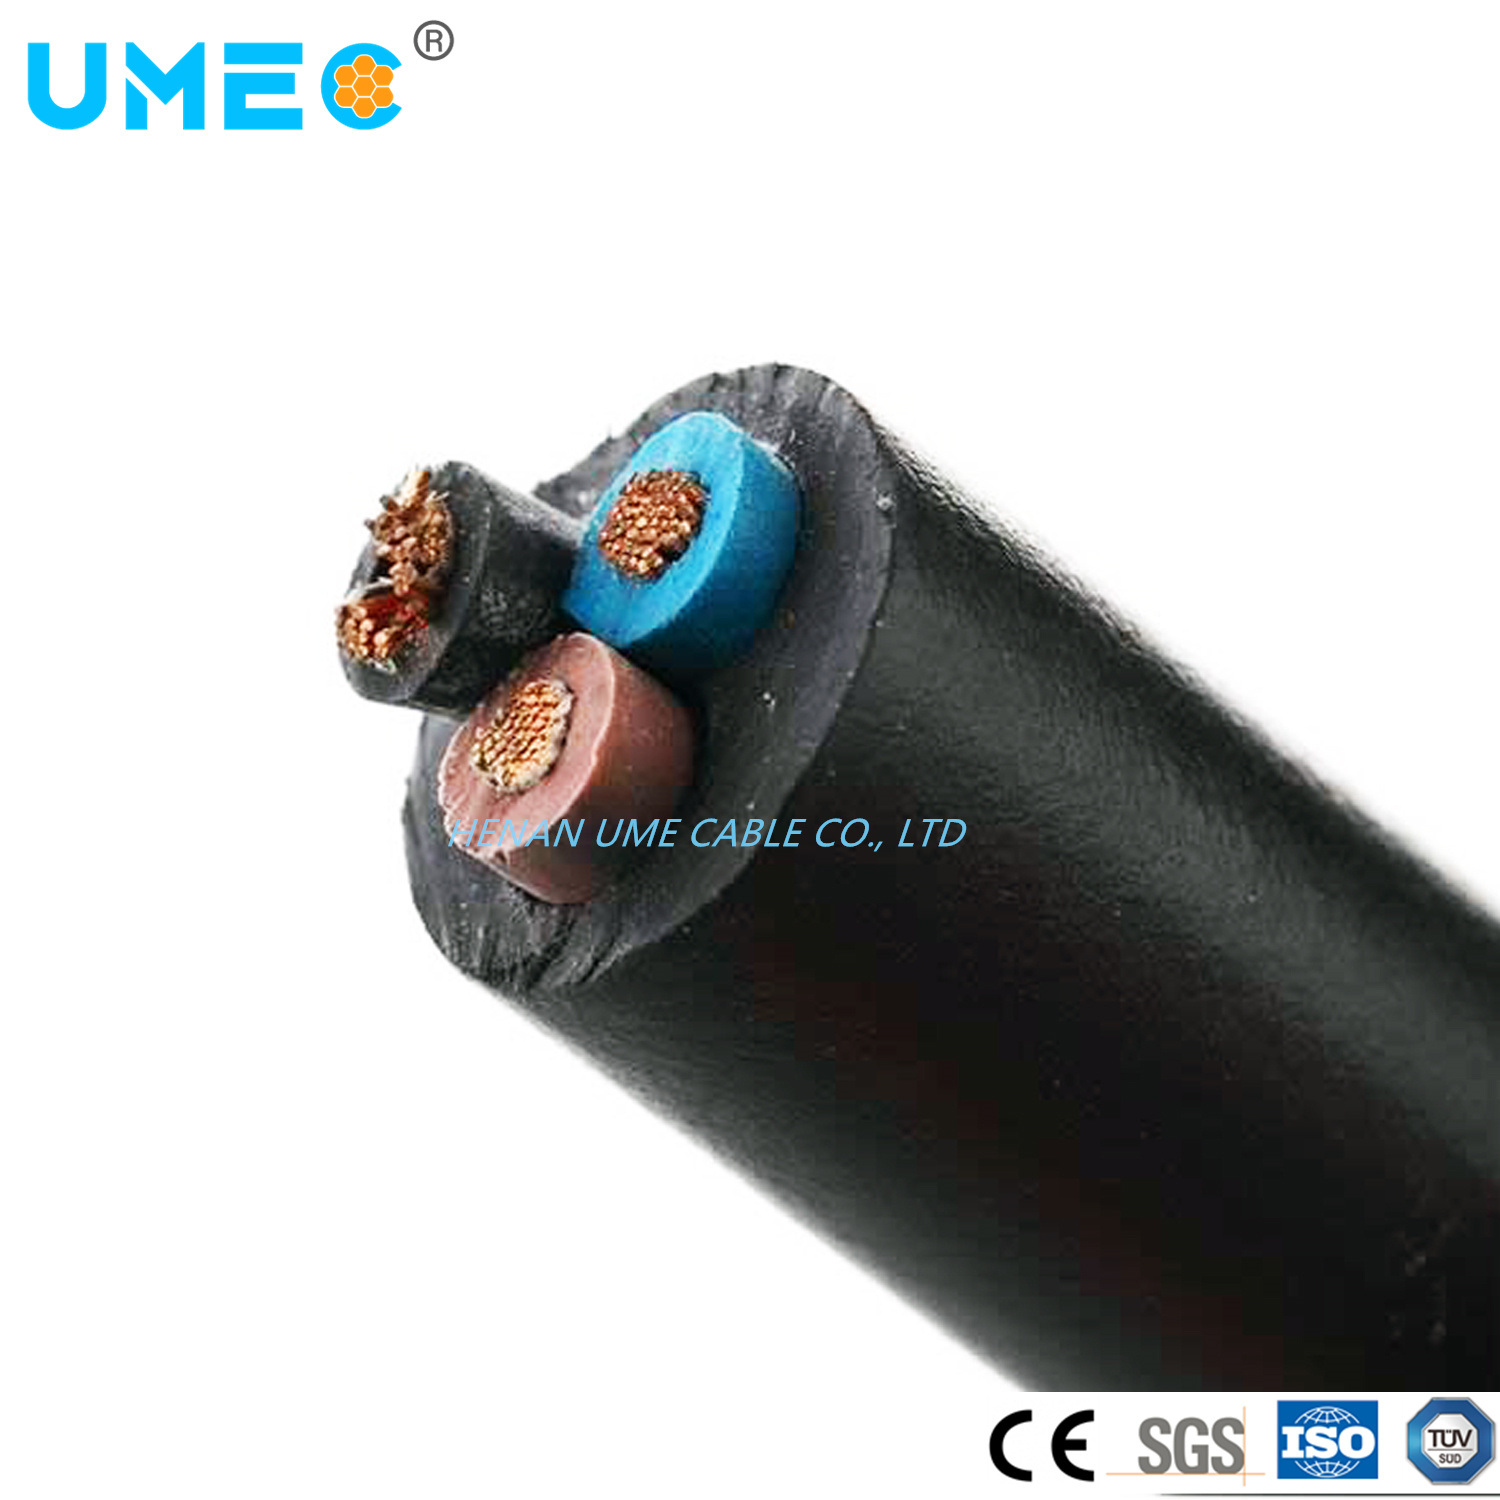 Electrical Cable Wire China Manufacturer Factory Price Ume Brand General Rubber Sheathed Flexible Cable Rubber Cable Electric Cable